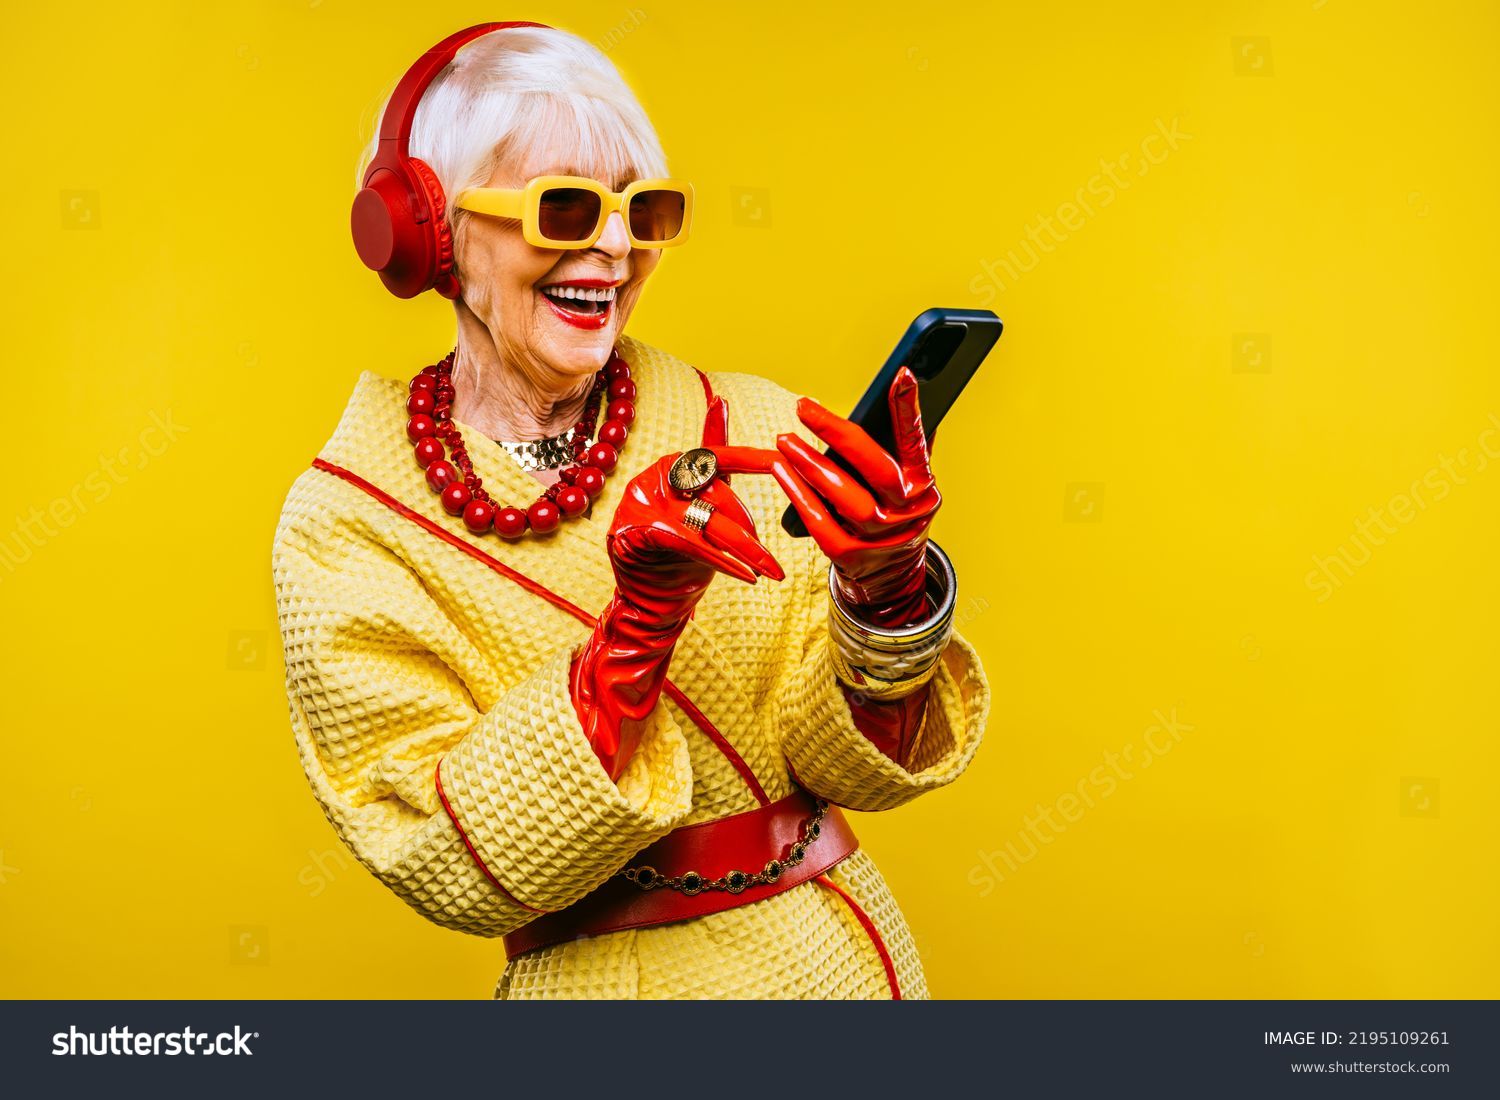 Happy and funny cool old lady with fashionable clothes portrait on colored background - Youthful grandmother with extravagant style, concepts about lifestyle, seniority and elderly people #2195109261